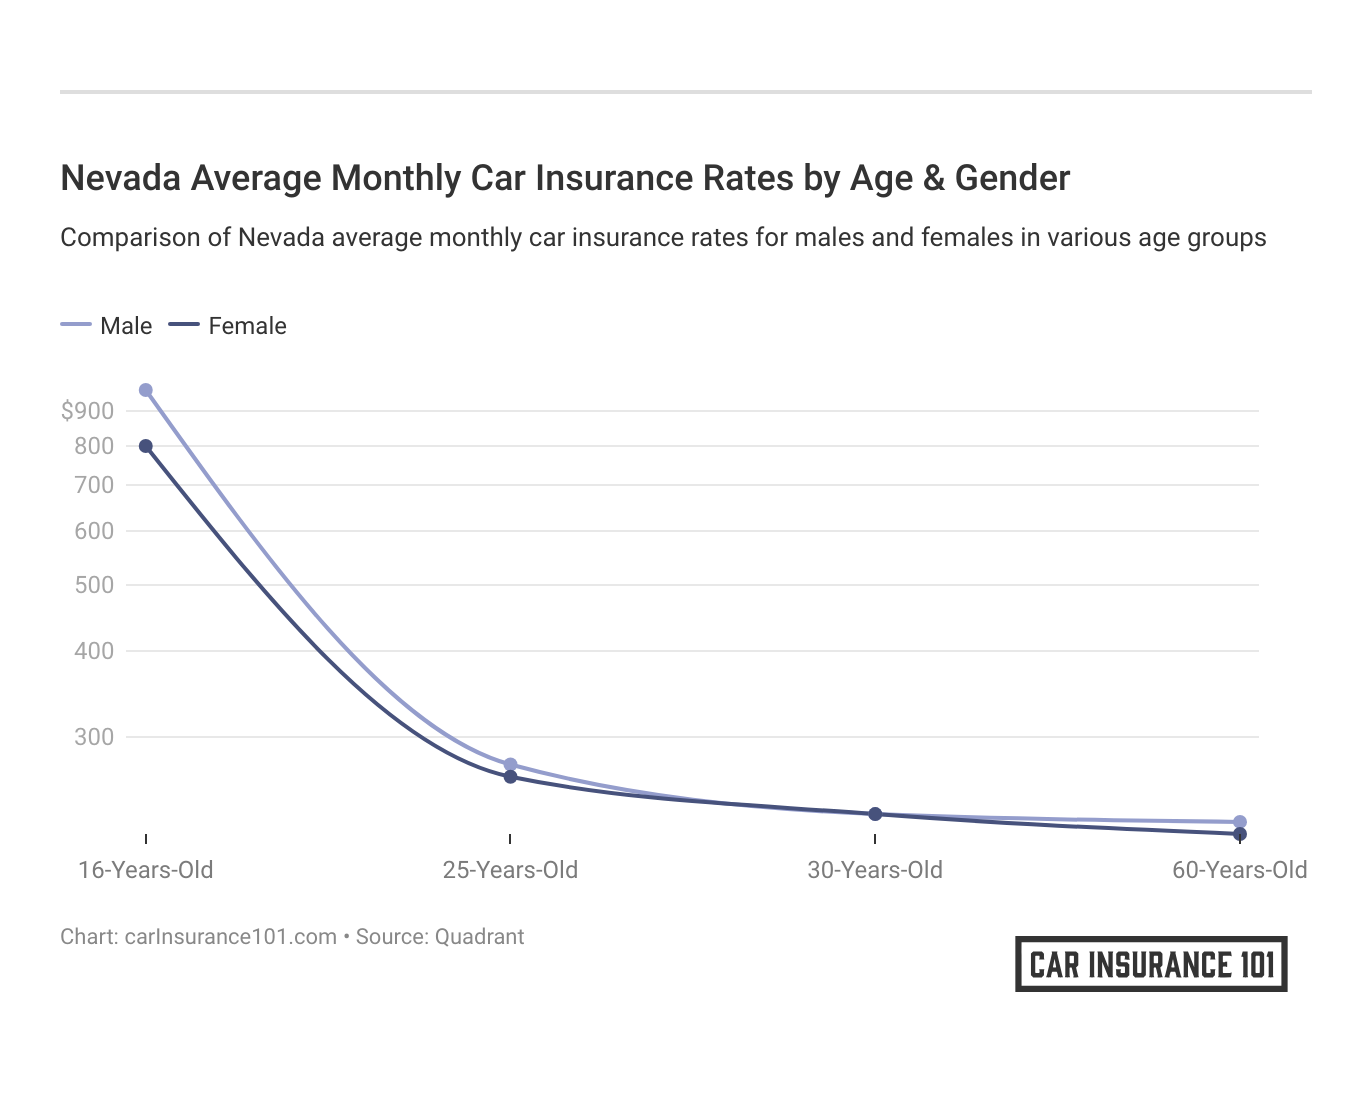 <h3>Nevada Average Monthly Car Insurance Rates by Age & Gender</h3>